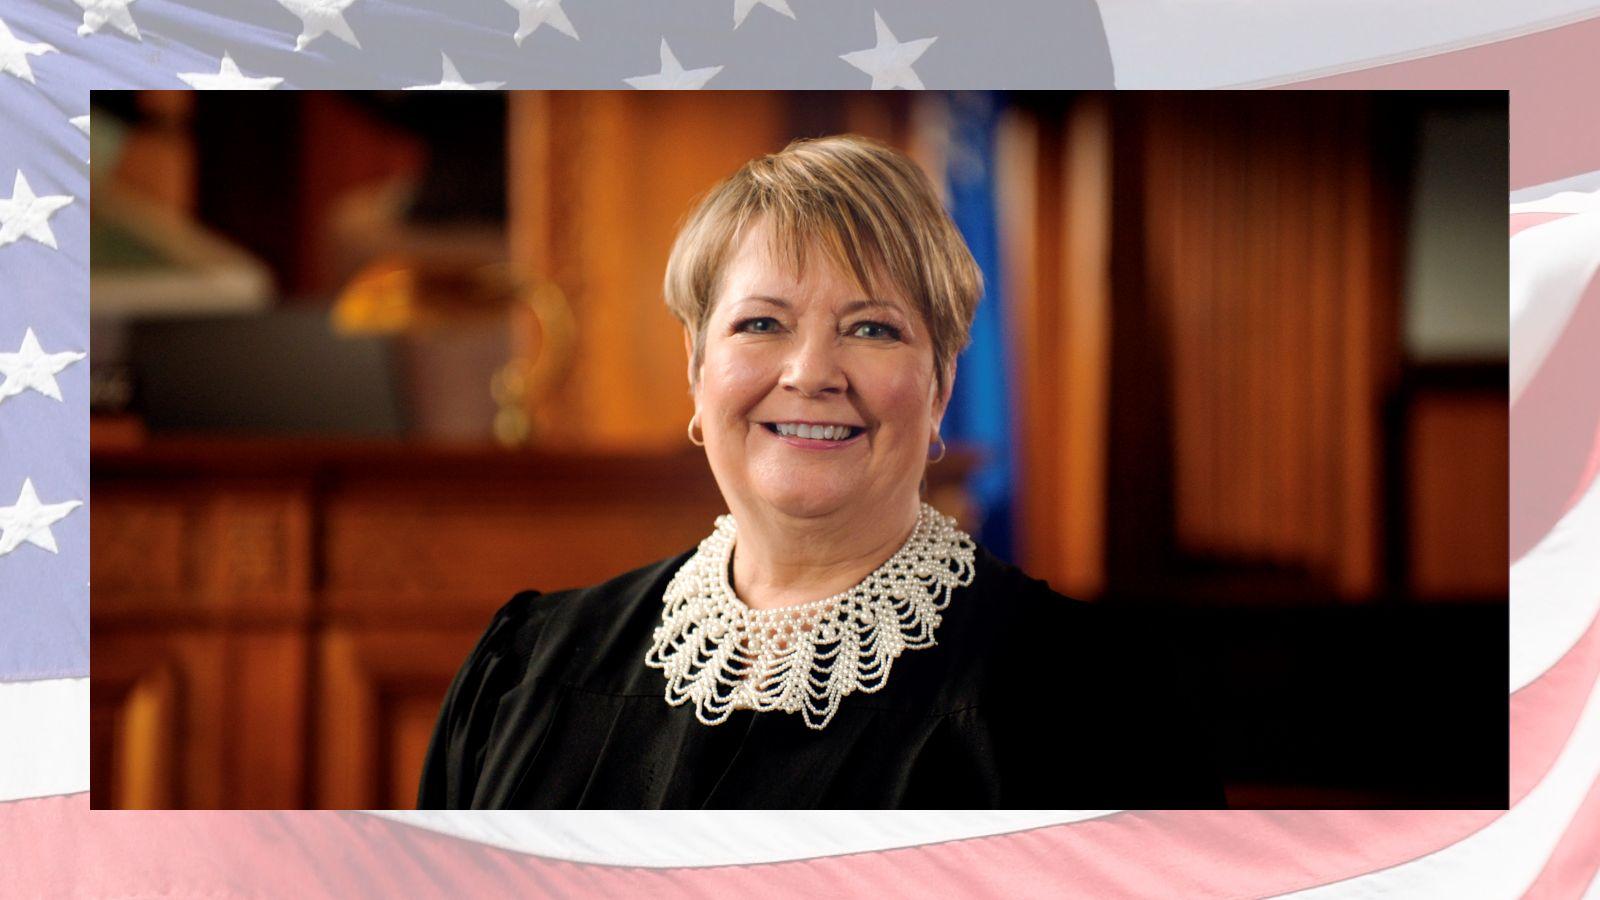 Protasiewicz Declines to Recuse Herself in Mobile Voting Case